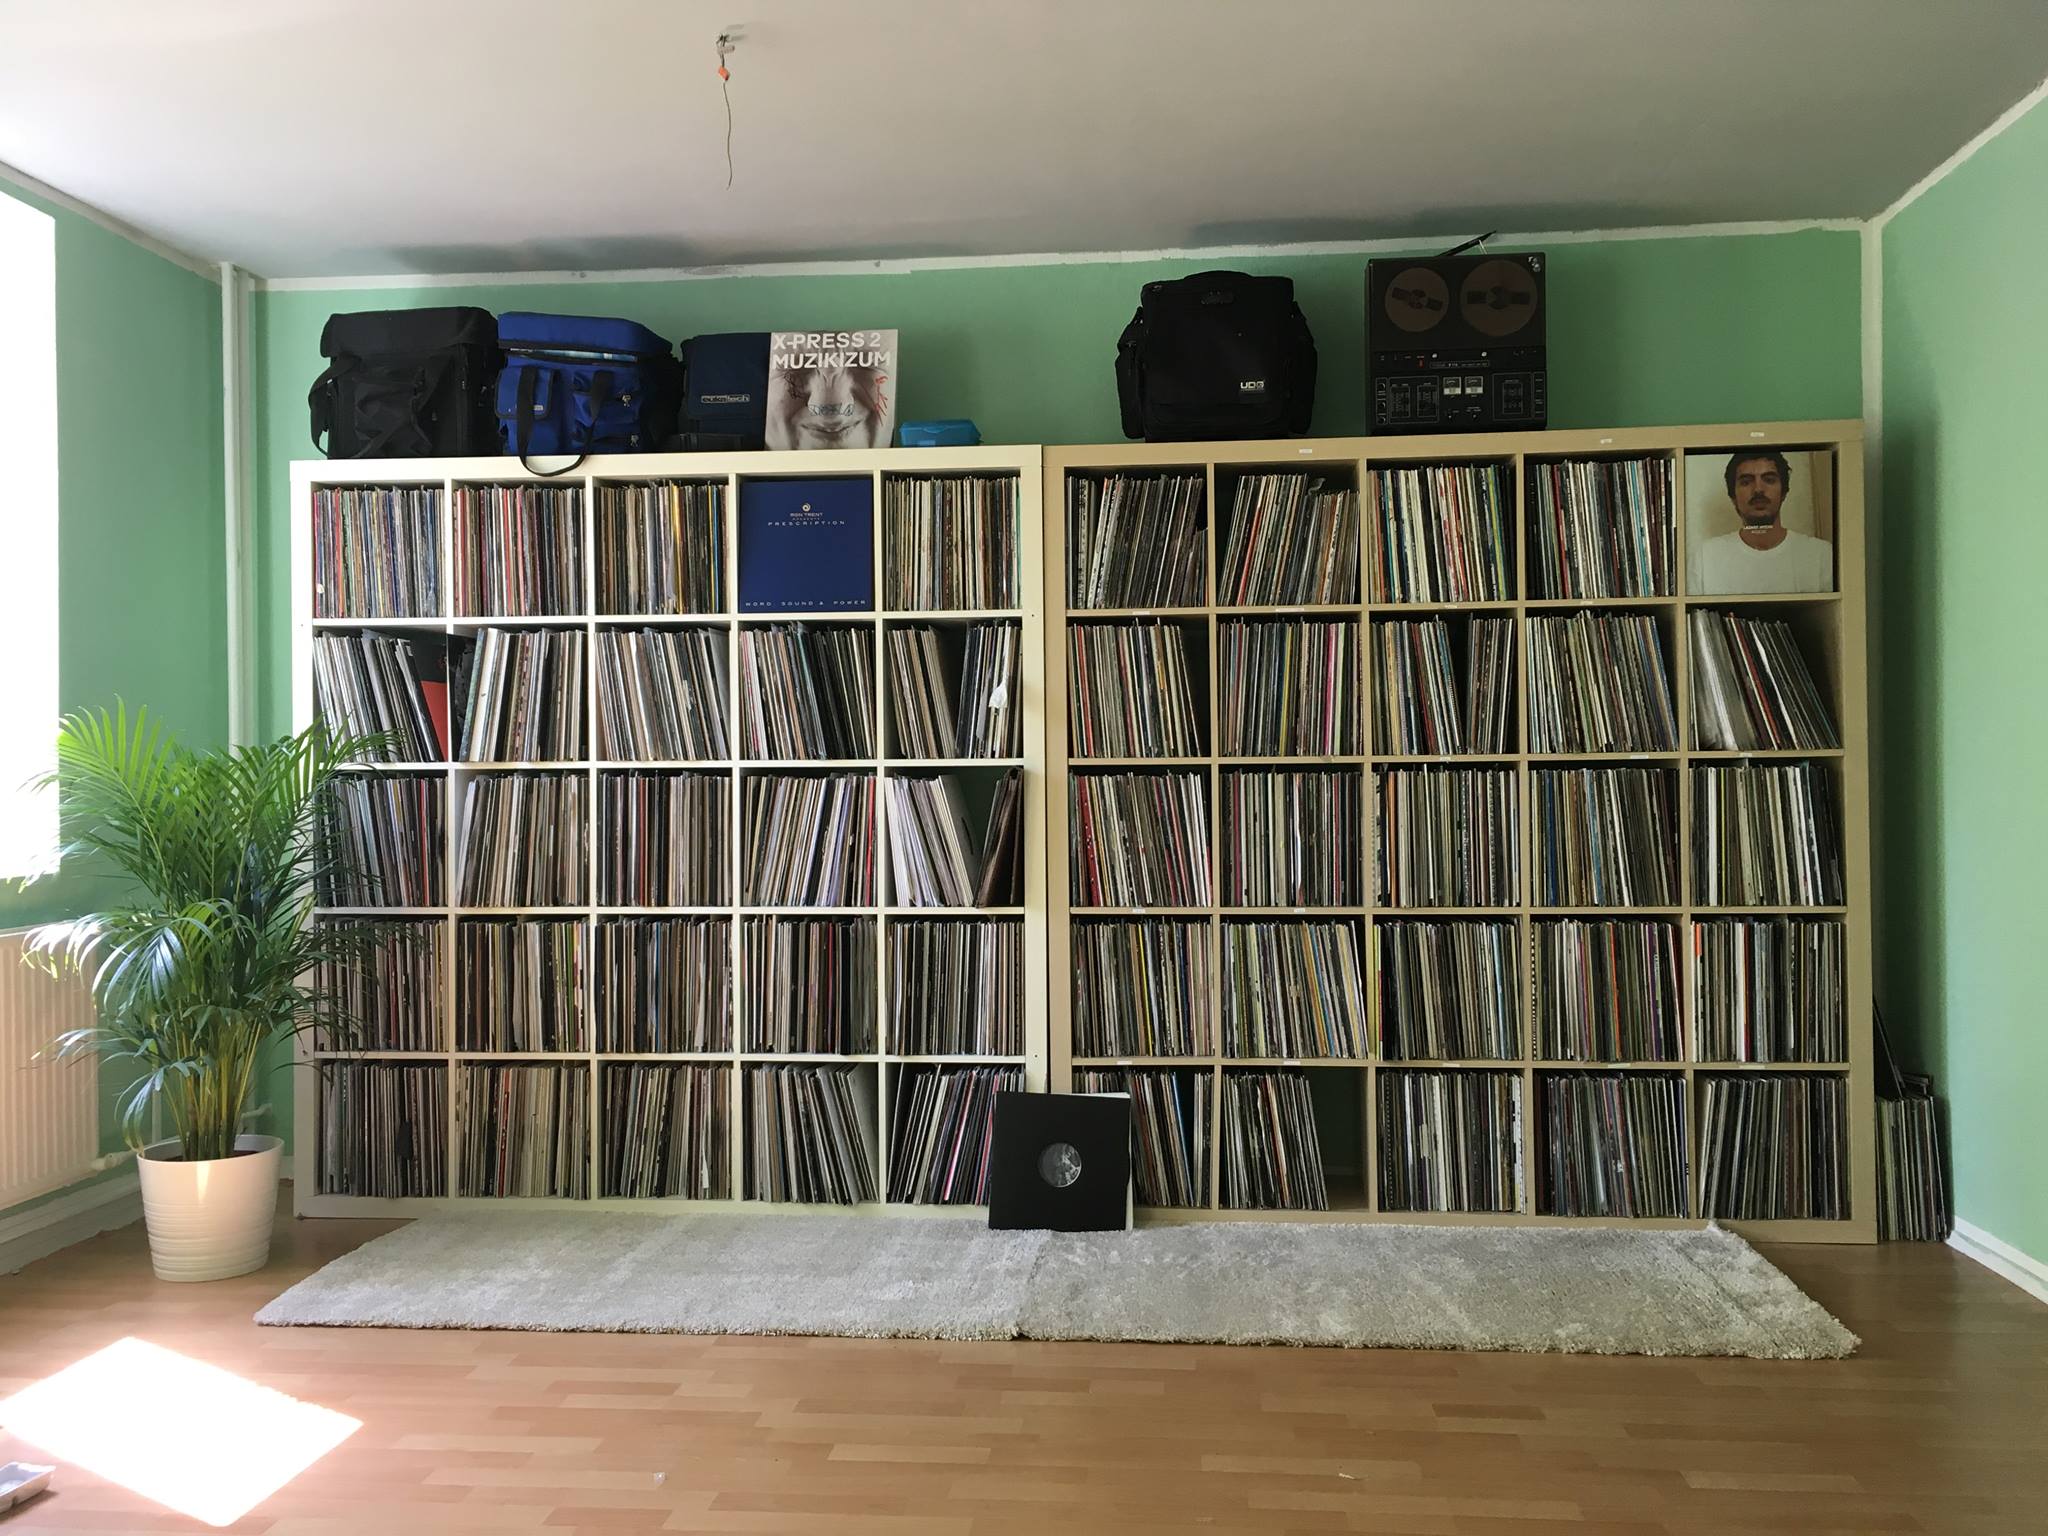  Cinthie's collection of over 6,000 records.